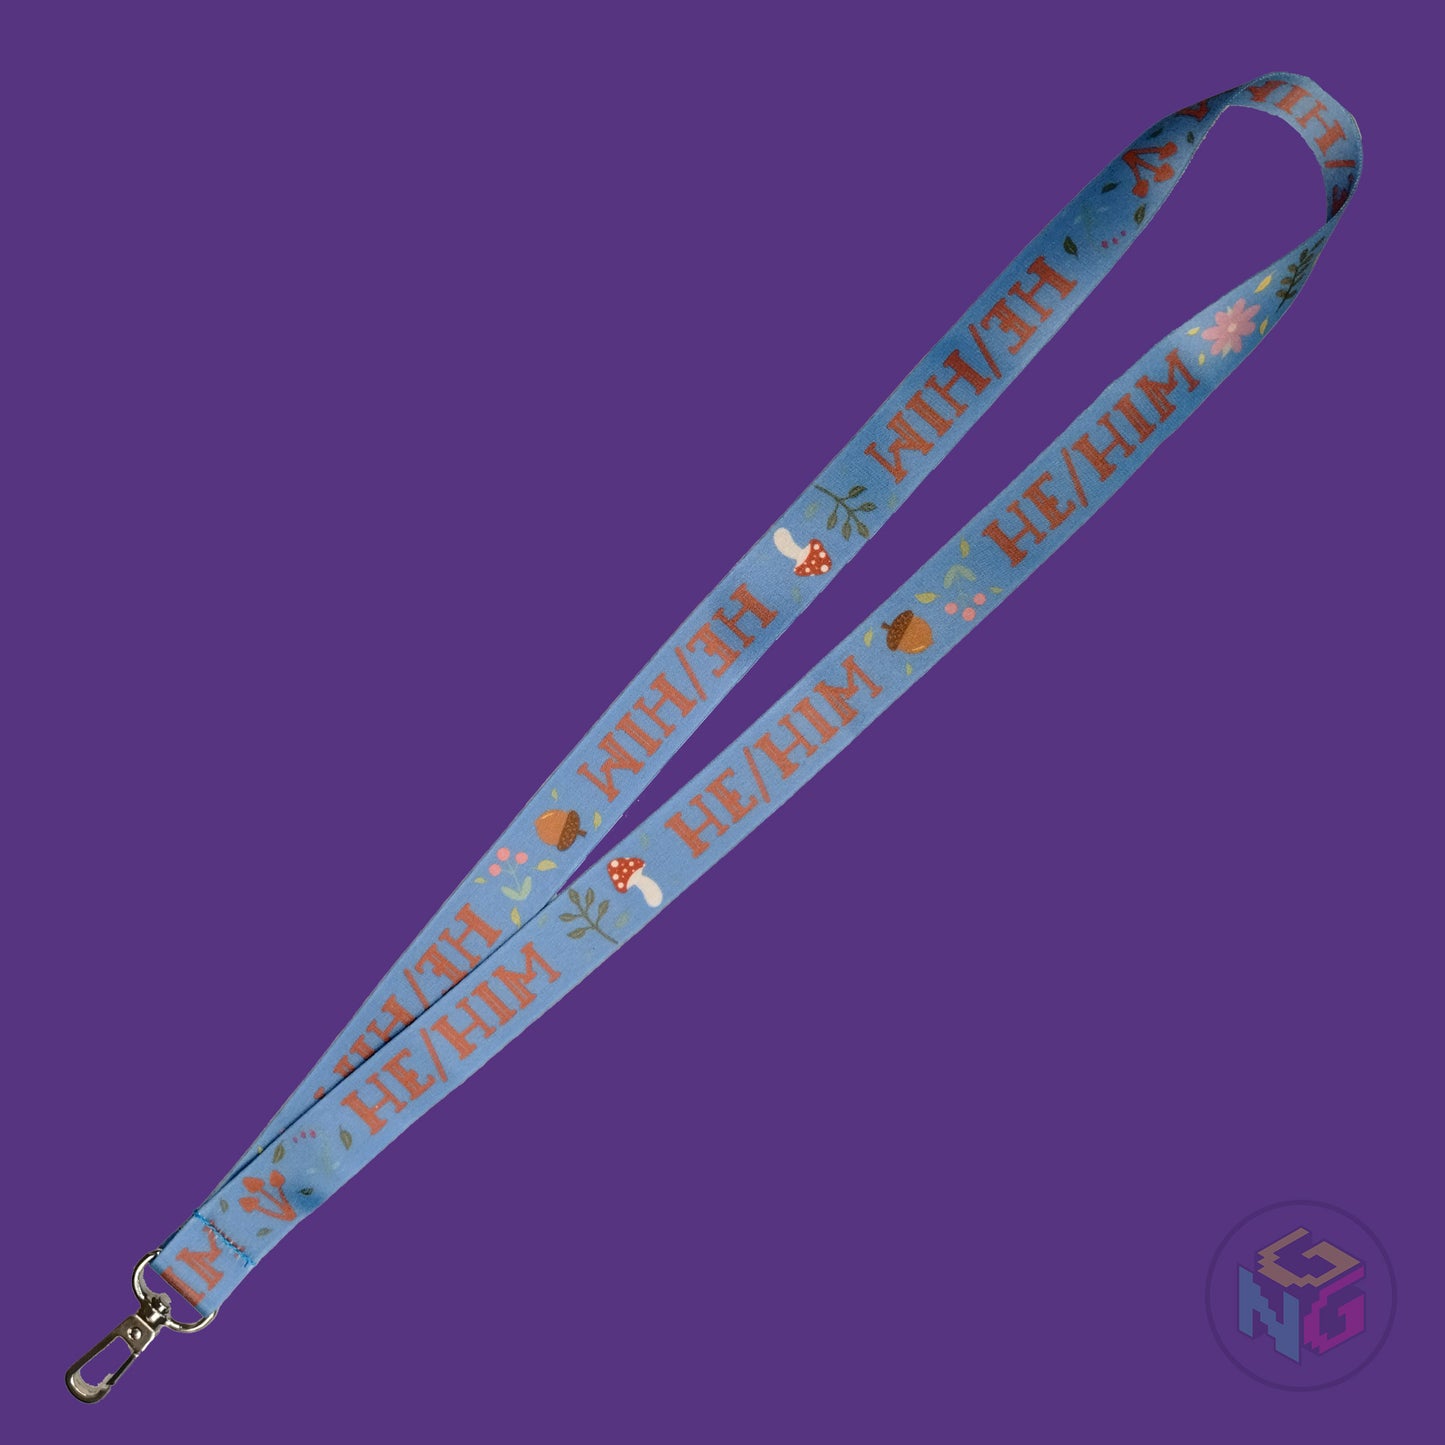 the blue he him cottagecore lanyard lying flat showing the complete design and repeating pattern of acorns, berries, mushrooms, leaves, and he him pronouns.